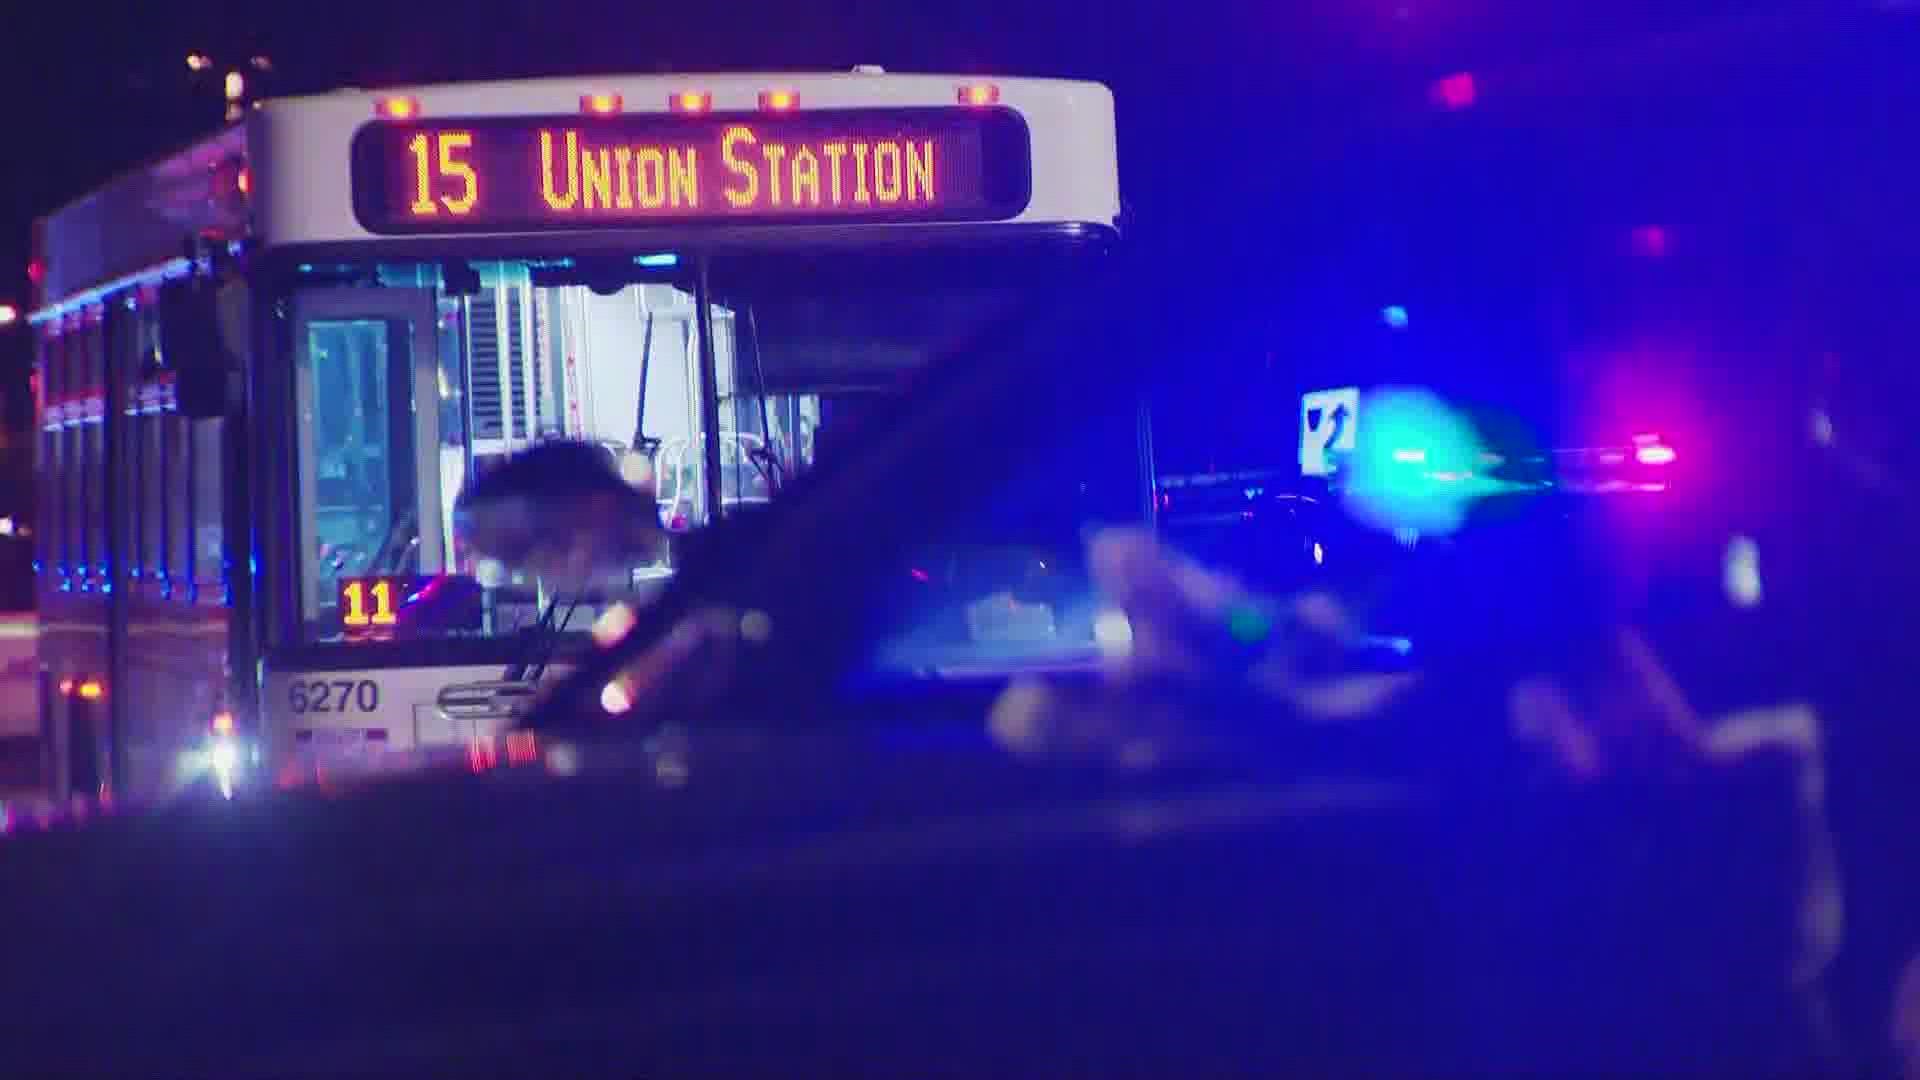 The shooting happened Sunday evening on a #15 bus near the intersection of Colfax Avenue and Moline Street.